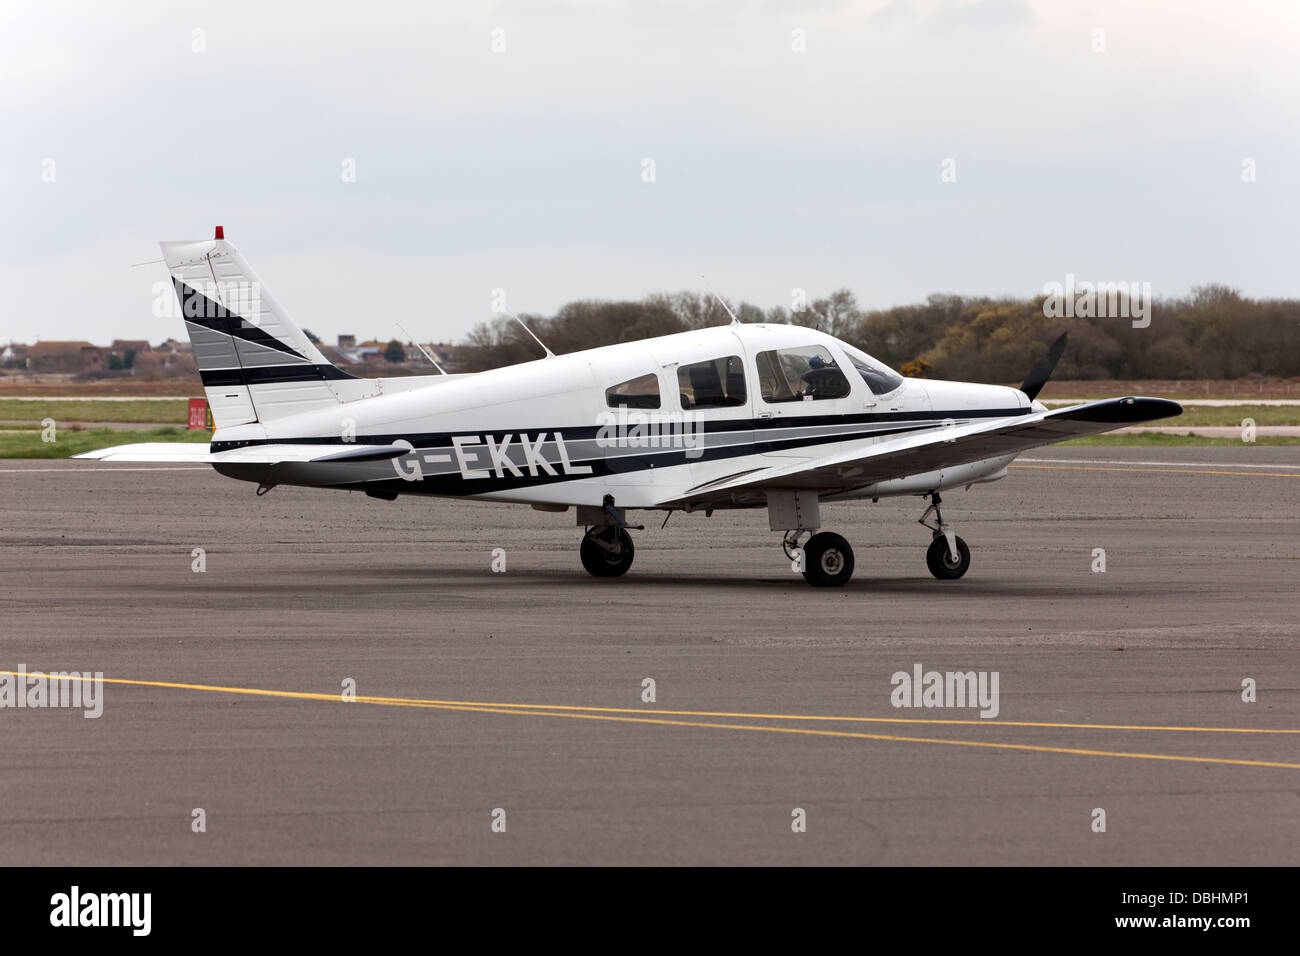 Piper PA-28-161 Cherokee Warrior II G-EKKL parked on the apron at Lydd Airport Stock Photo